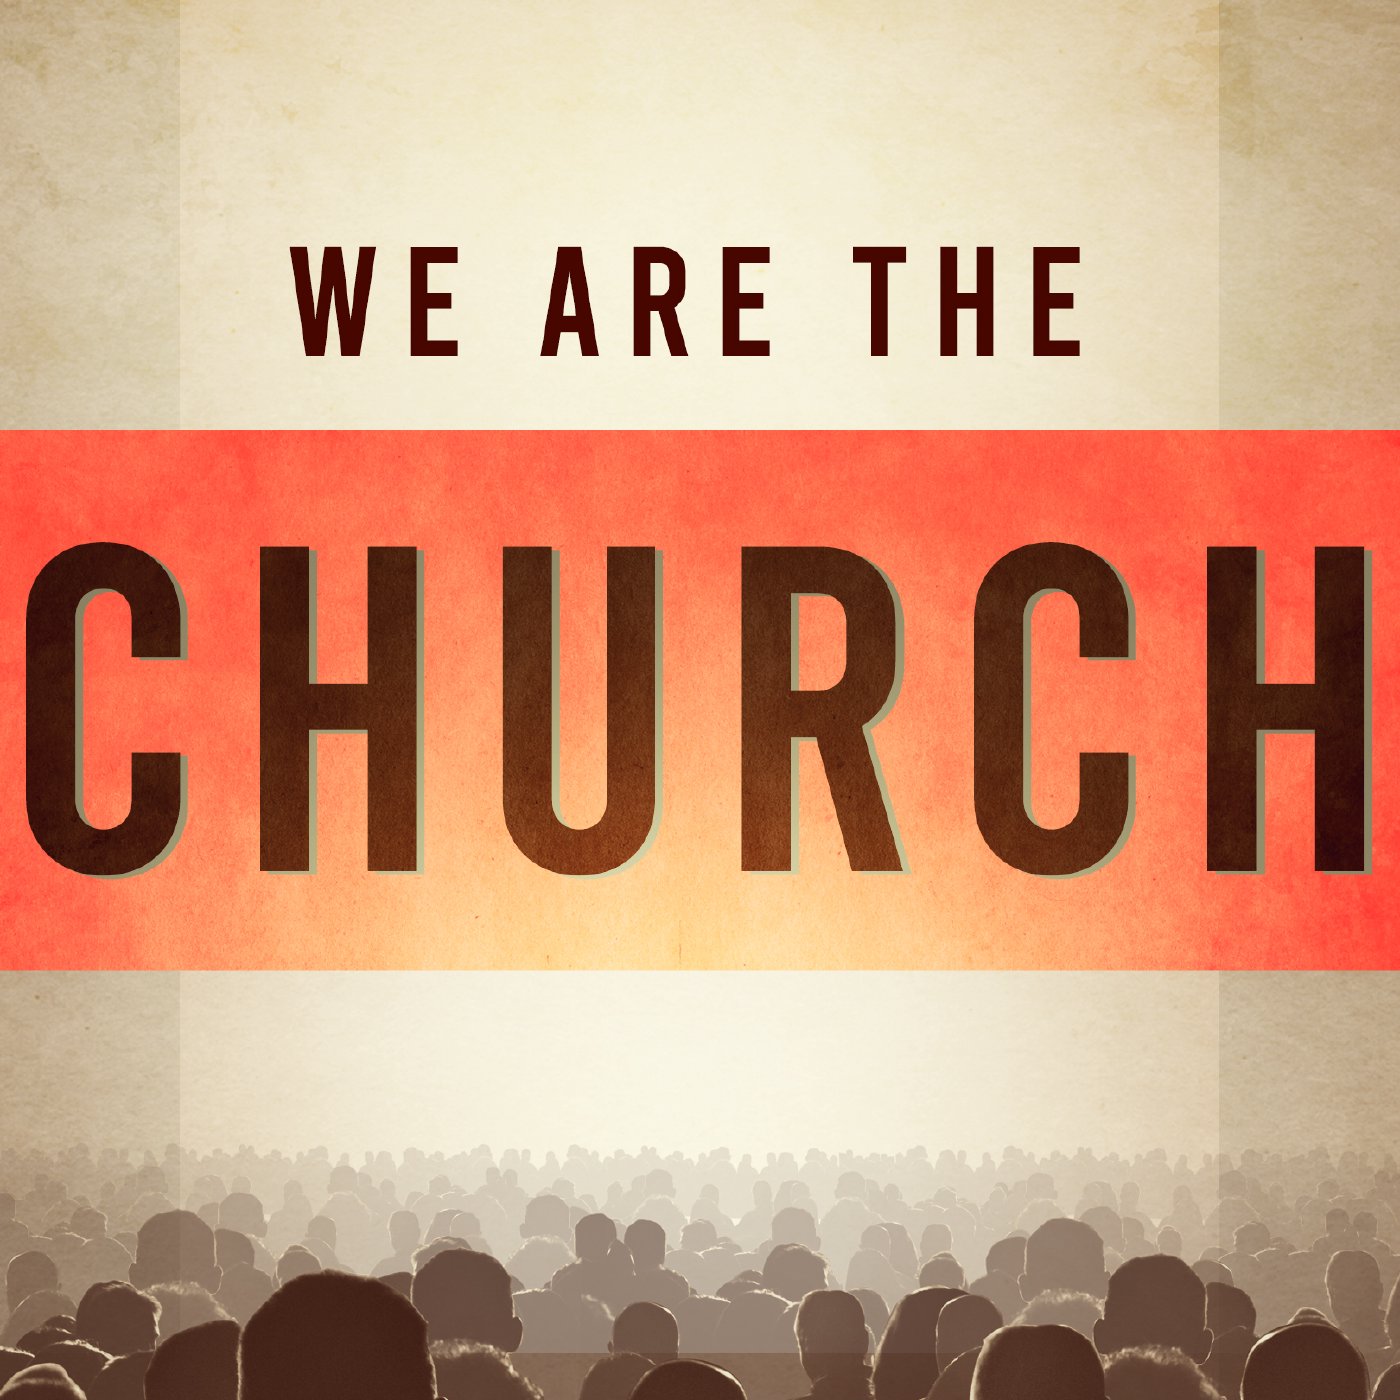 We Are the Church: Going